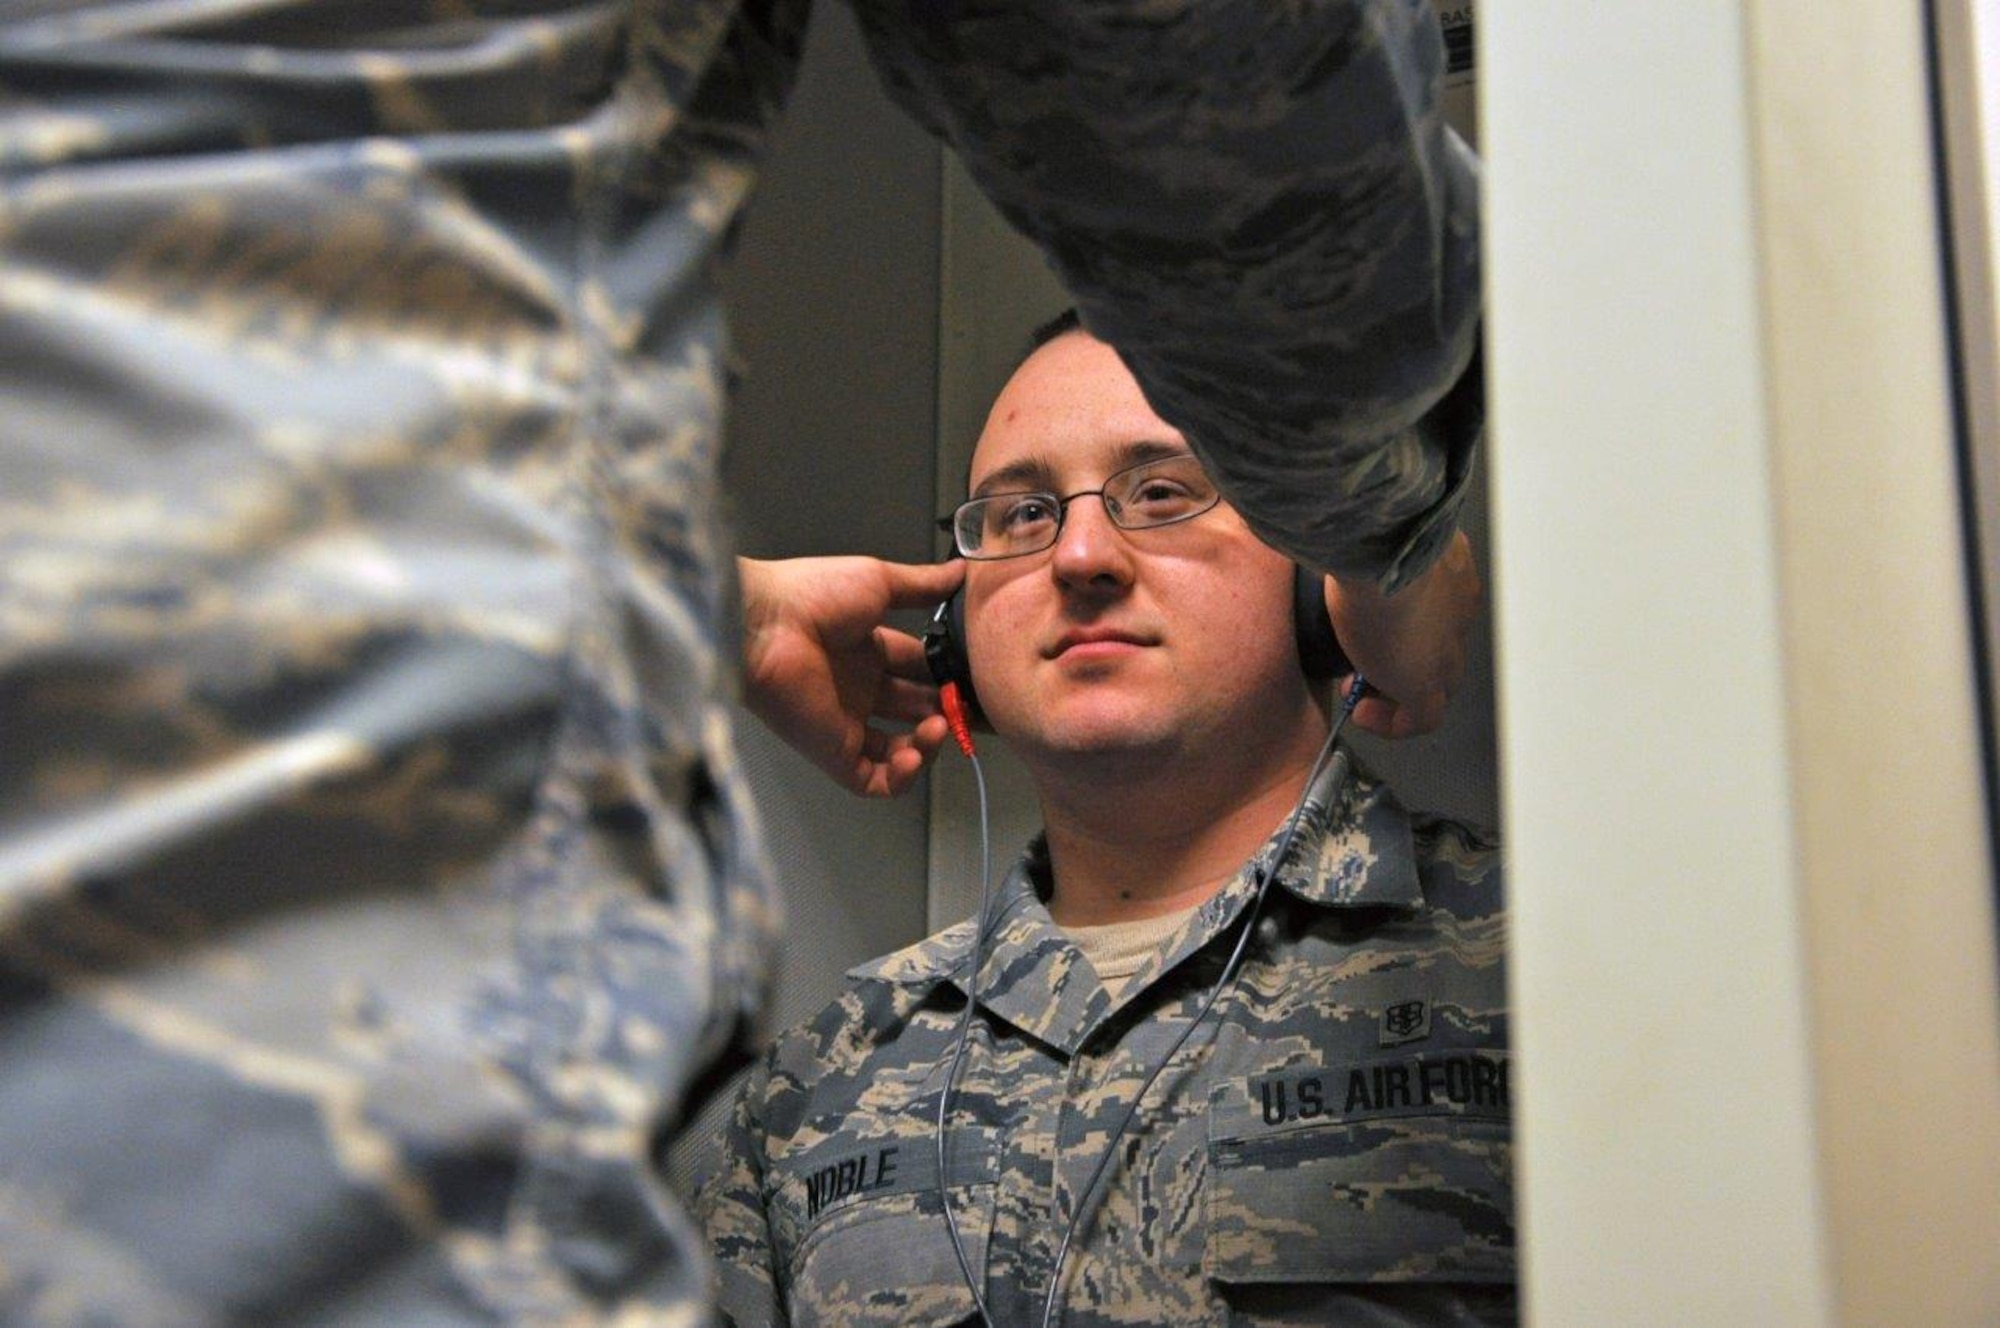 Senior Airman Logan Noble demonstrates getting fitted with audio phones for an audiogram during a Periodic Health Assessment. The Aerospace and Operational Medicine flight manages the PHA program for all active duty, guard and reserve personnel at Wright-Patterson AFB and geographically separated units. (U.S. Air Force photo/Myra Saxon)